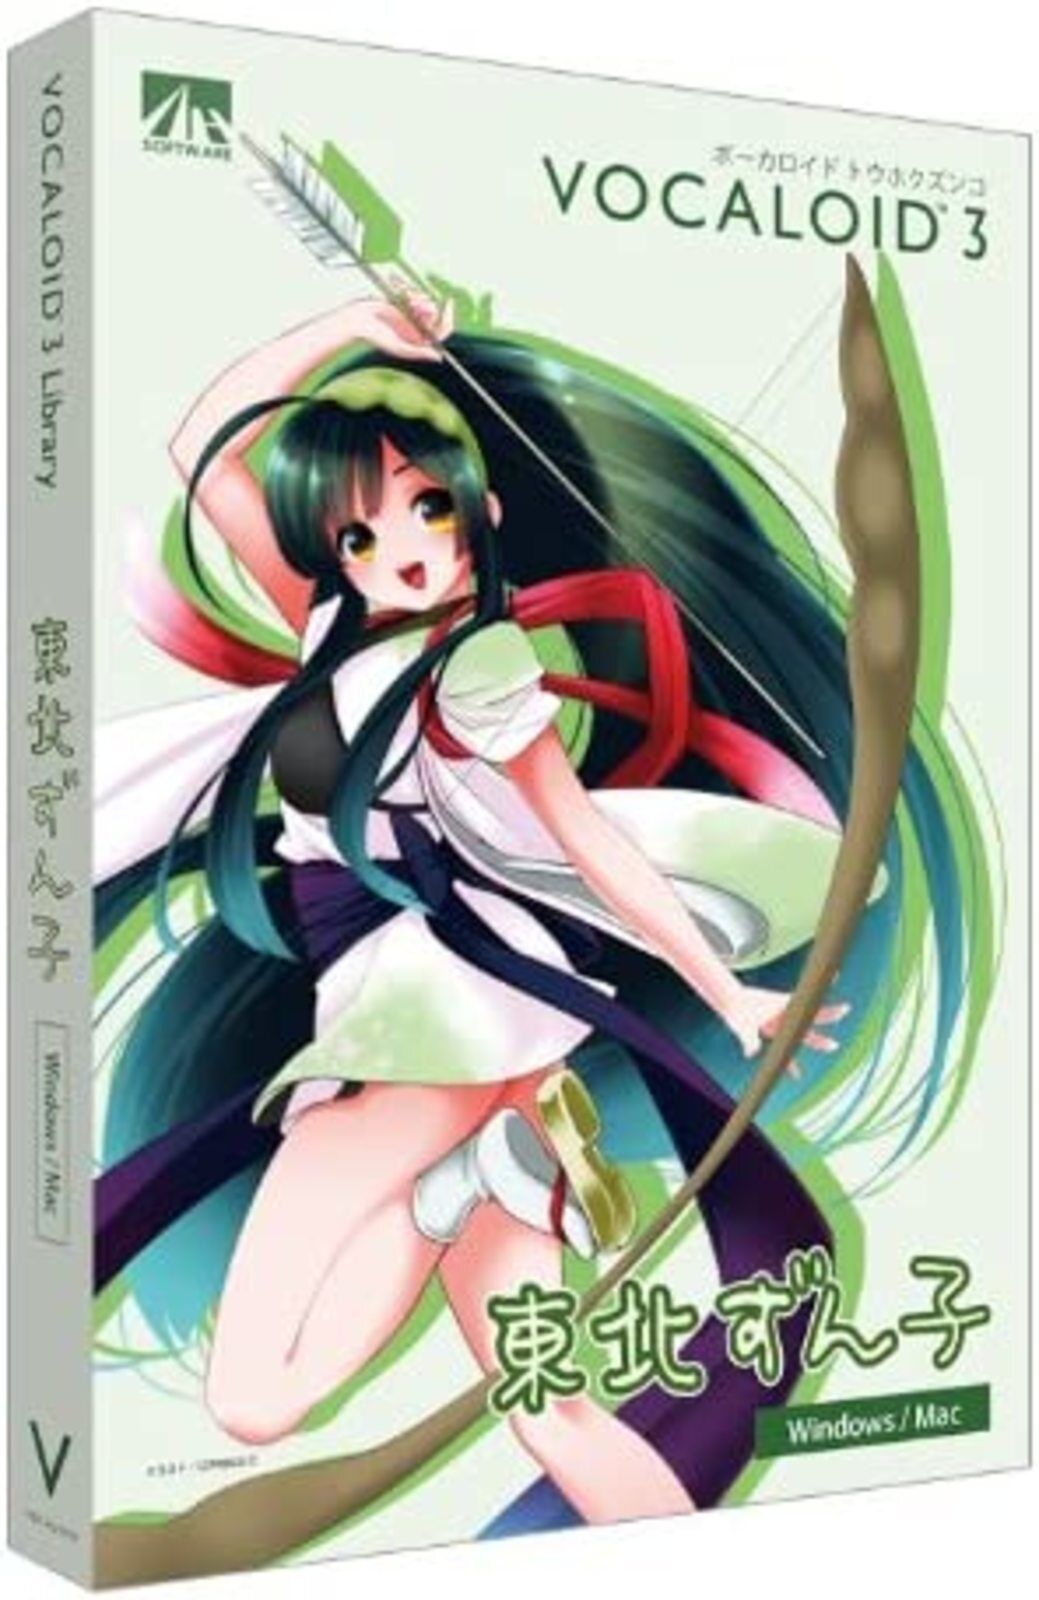 Vocaloid 3 Character Vocal Library TOUHOKU ZUNKO Computer Vocal software F/S NEW